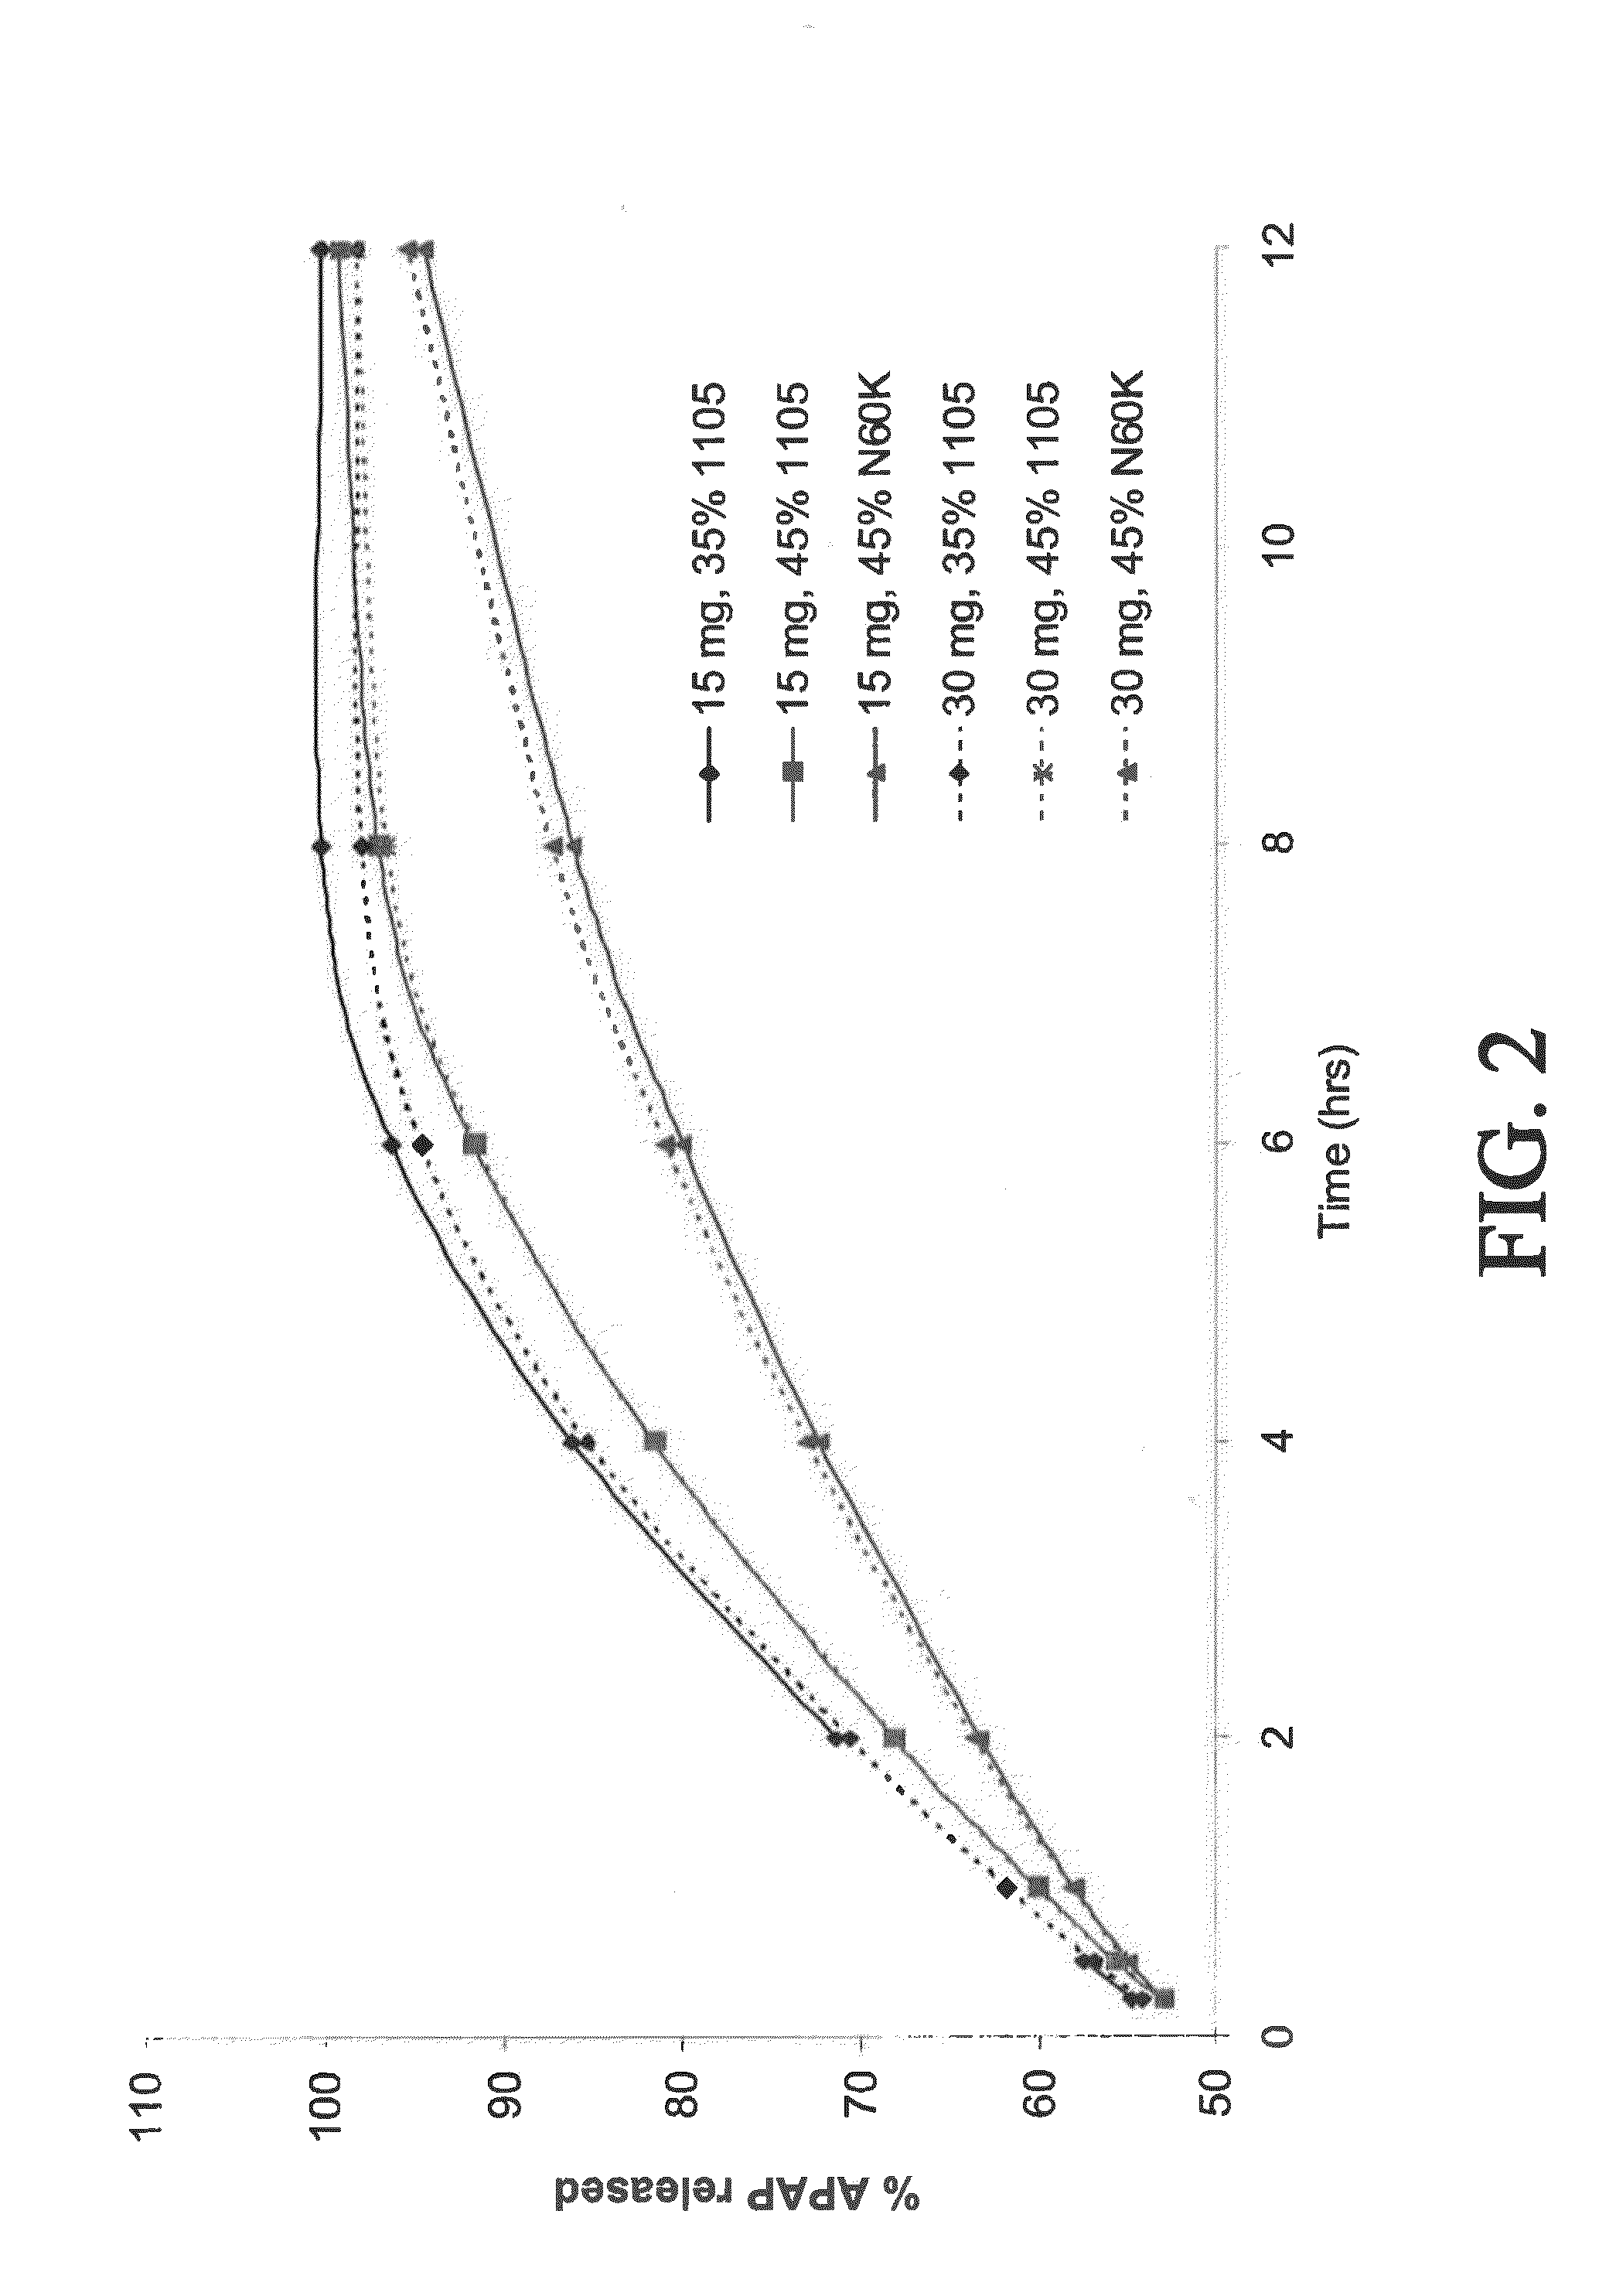 Combination composition comprising oxycodone and acetaminophen for rapid onset and extended duration of analgesia